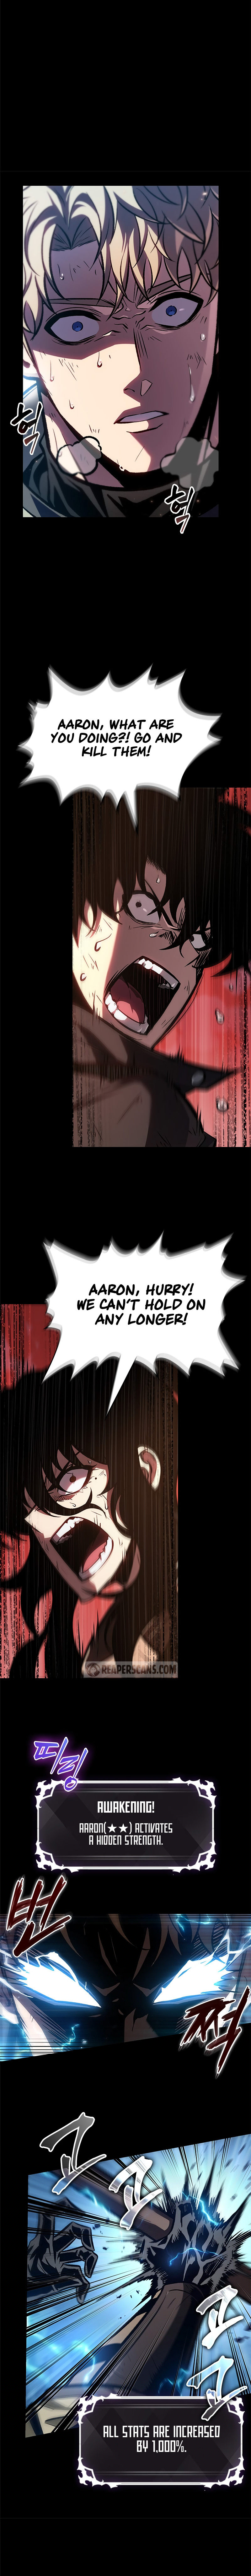 Pick Me Up - Chapter 84 Page 5